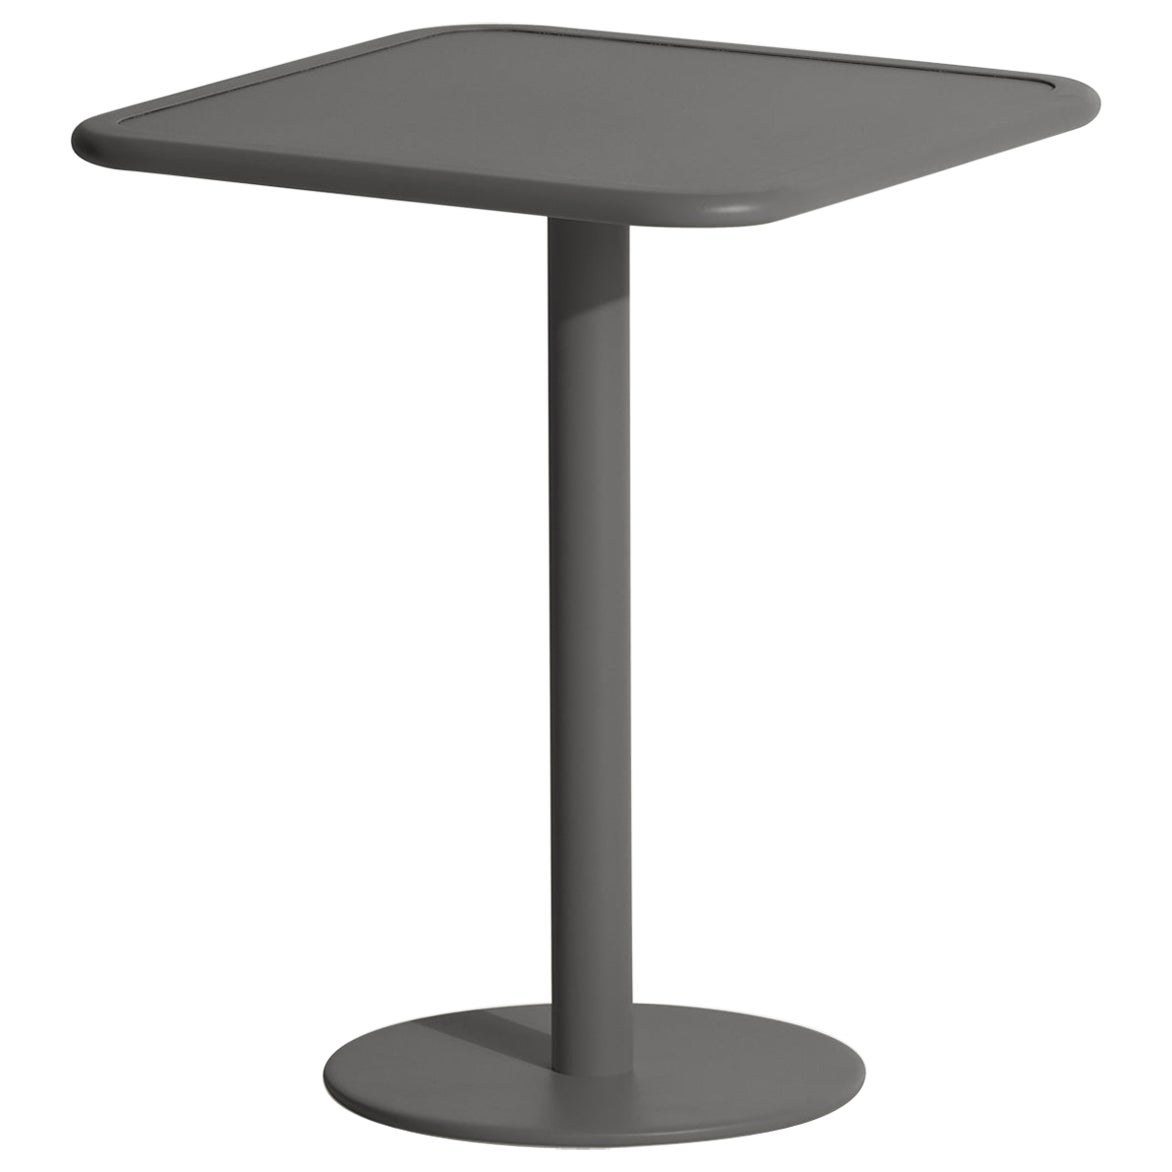 Petite Friture Week-End Bistro Square Dining Table in Anthracite Aluminium, 2017 For Sale